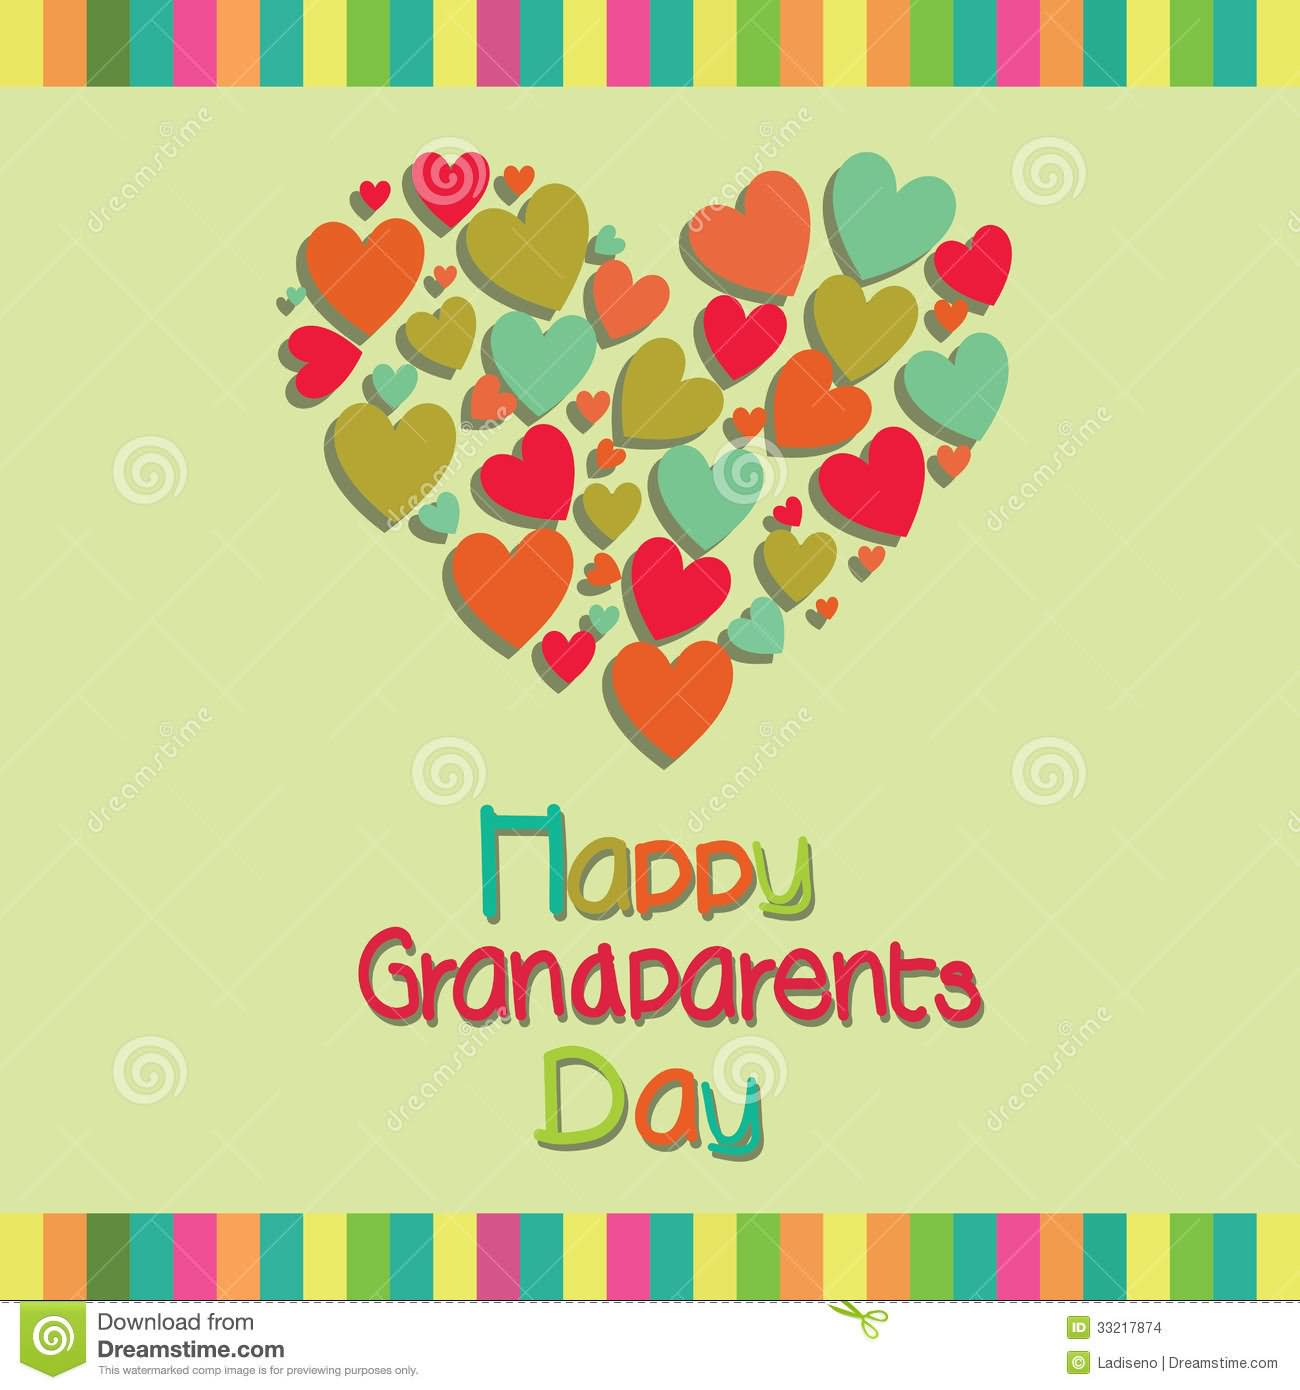 Happy Grandparents Day Heart Greeting Card